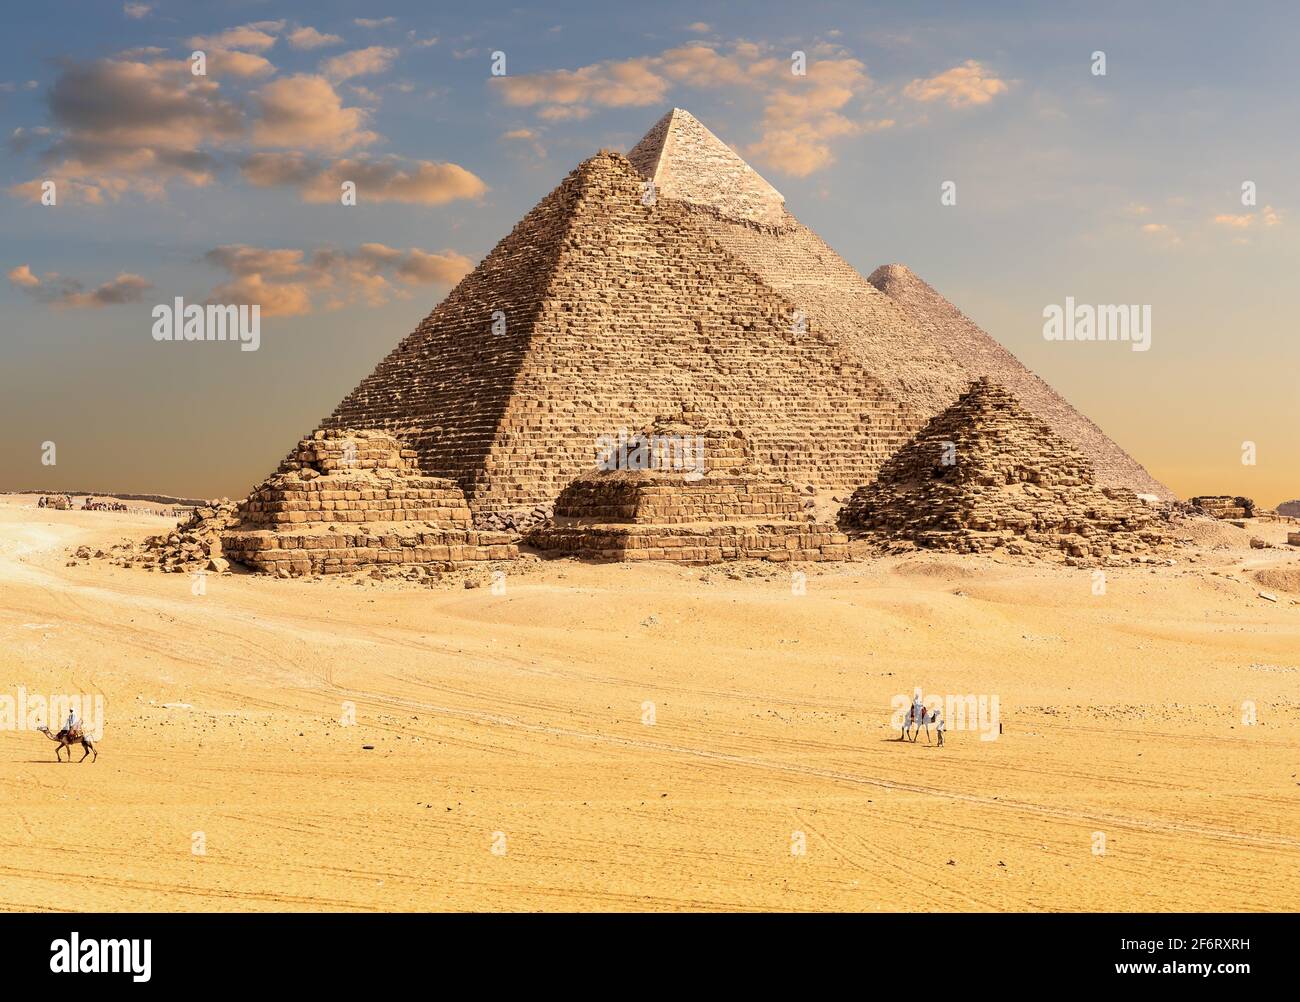 Pyramids of Giza in Egypt, sand dunes and bedouins. Stock Photo